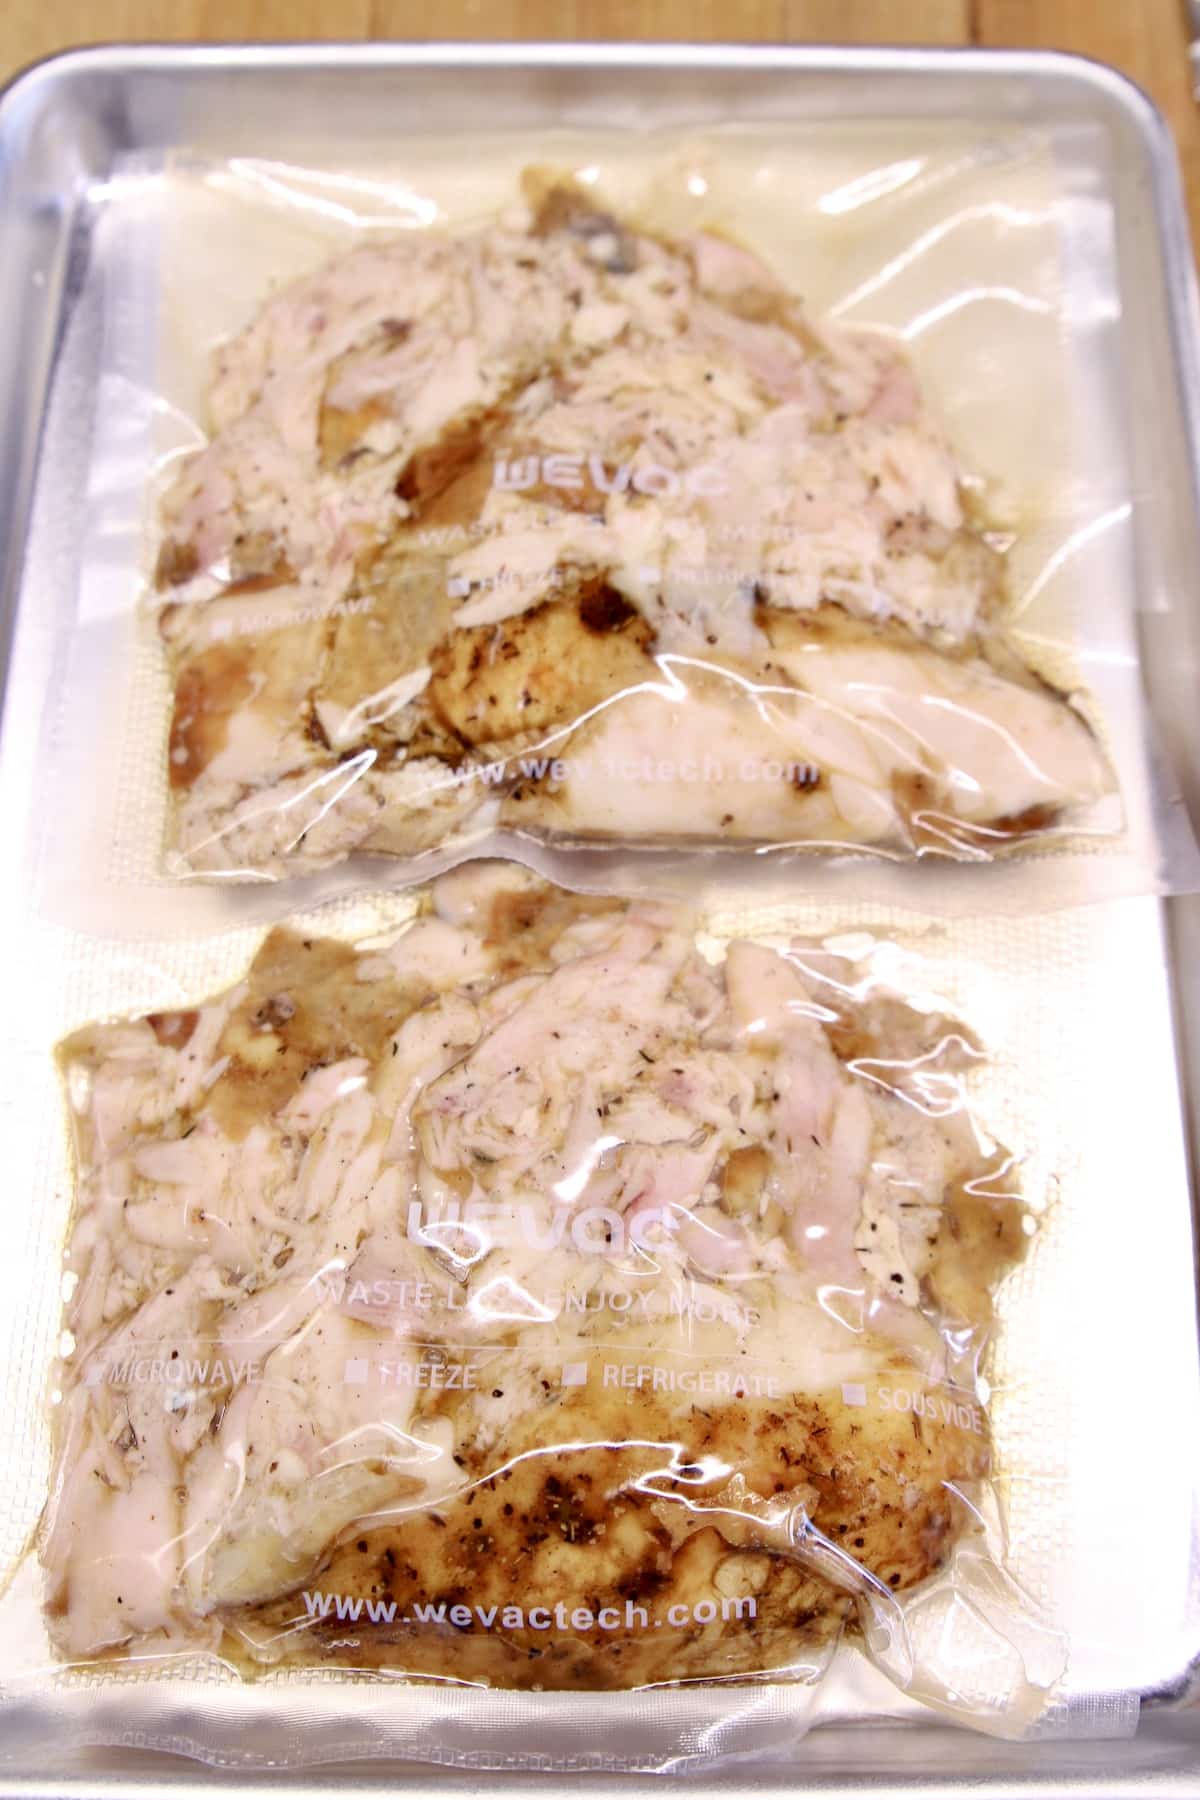 2 packages of vacuum sealed chicken on a sheet pan.